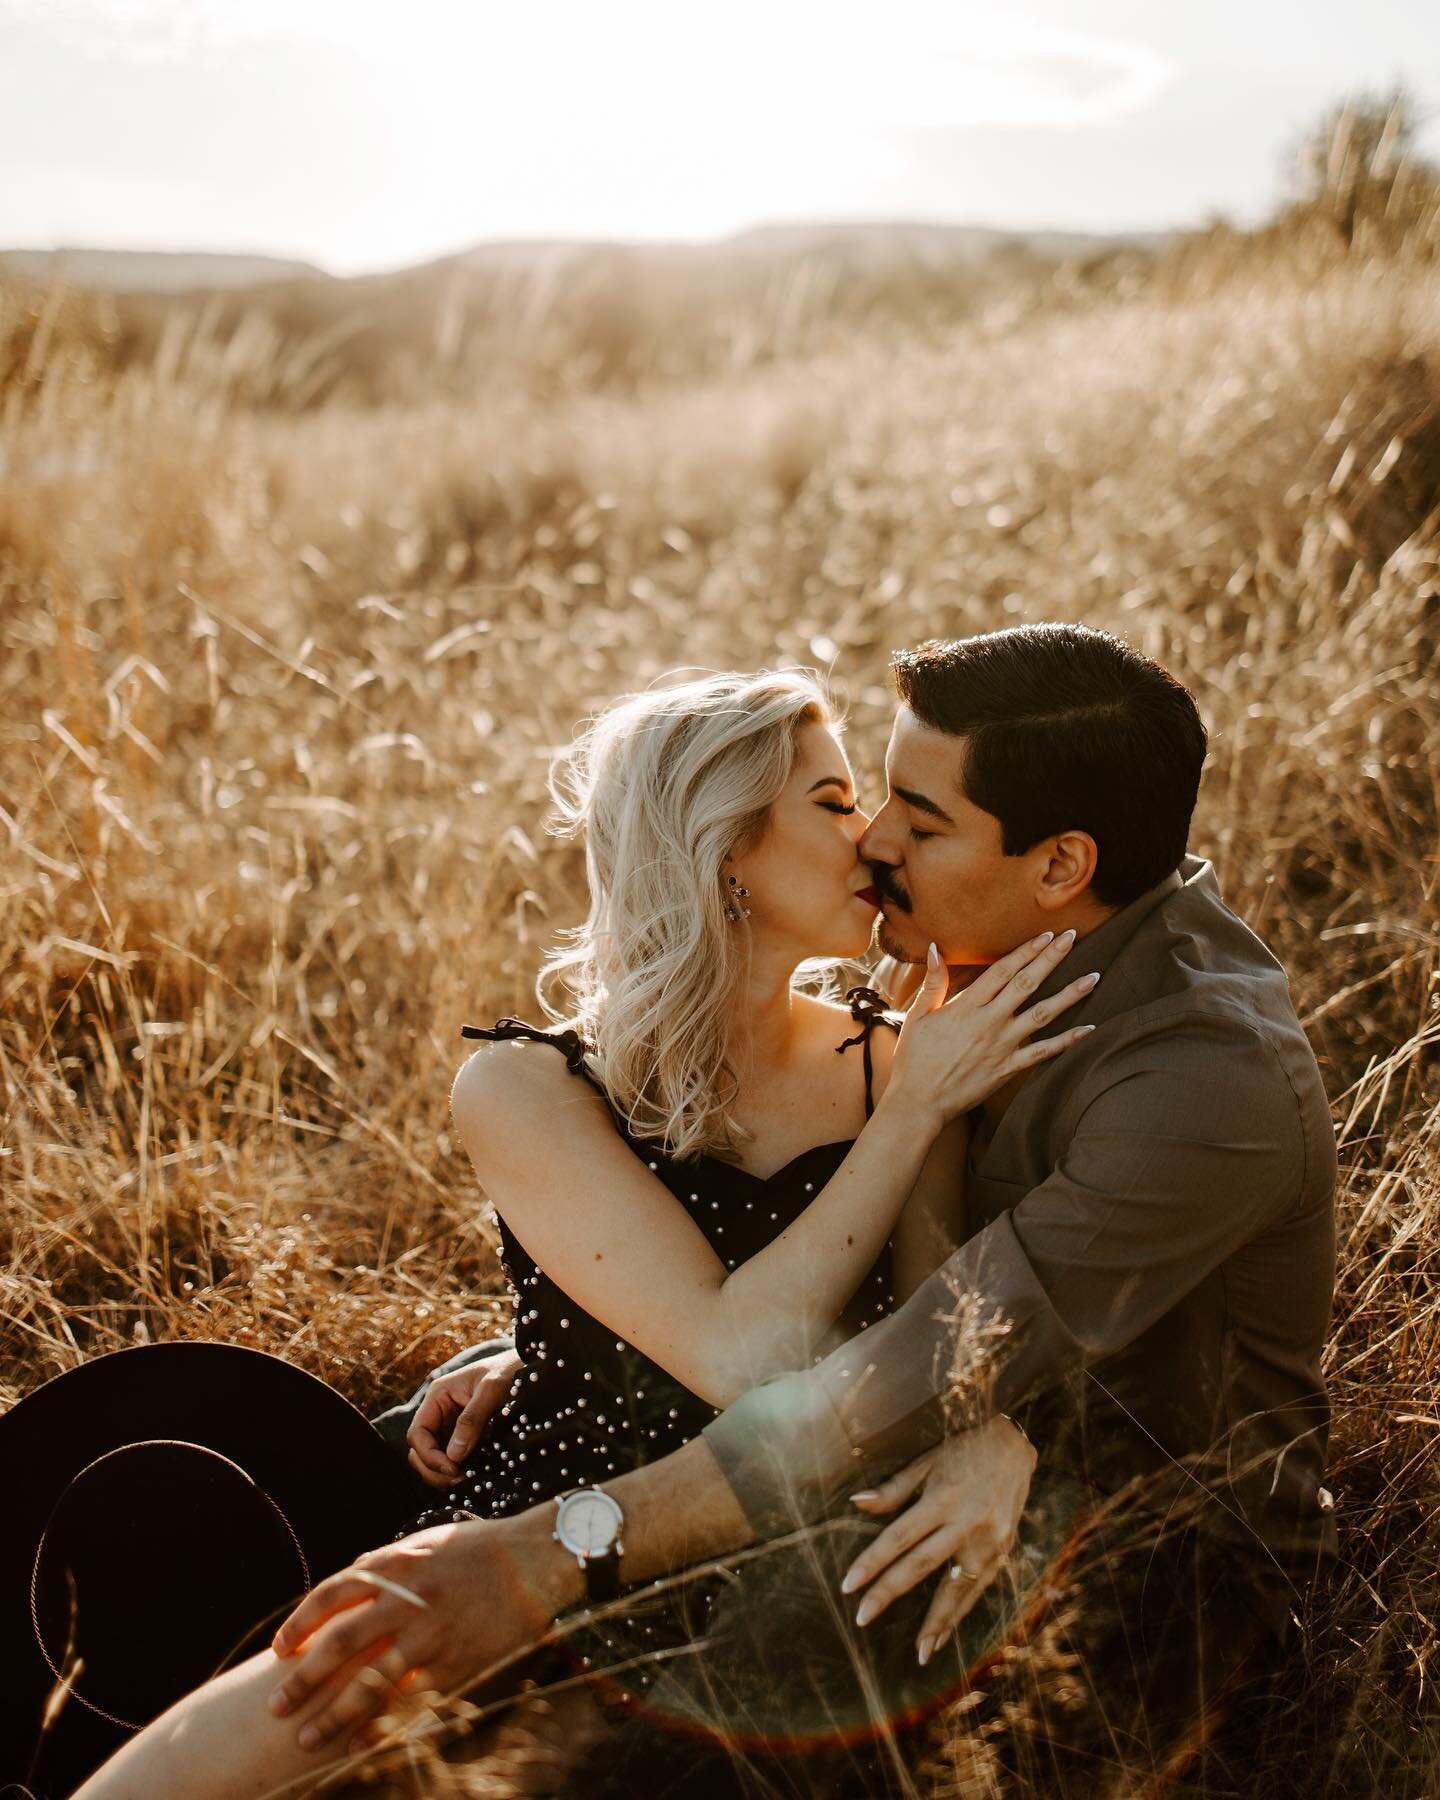 Questions to ask to create a deeper connection on your couple shoots:
-
➡️ what is one of the most attractive things your significant other DOES?
➡️ what was a moment in your relationship that you knew they were the one for you?
➡️ what is one thing 